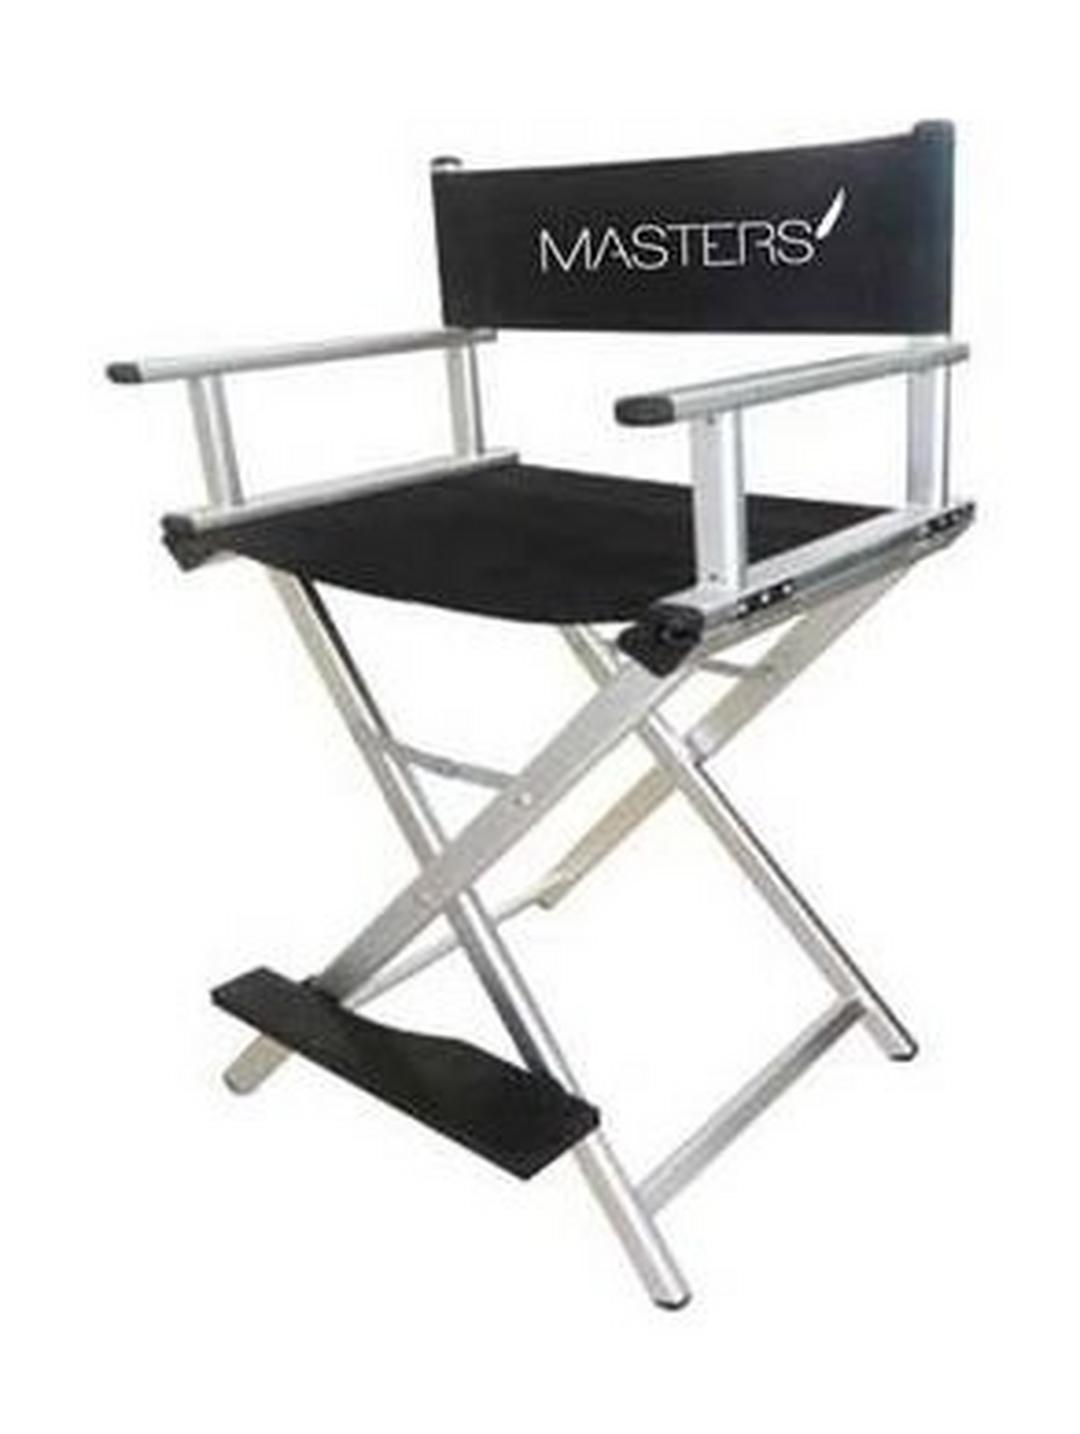 Masters Profession Make-Up Chair Black Fabric Silver Frame